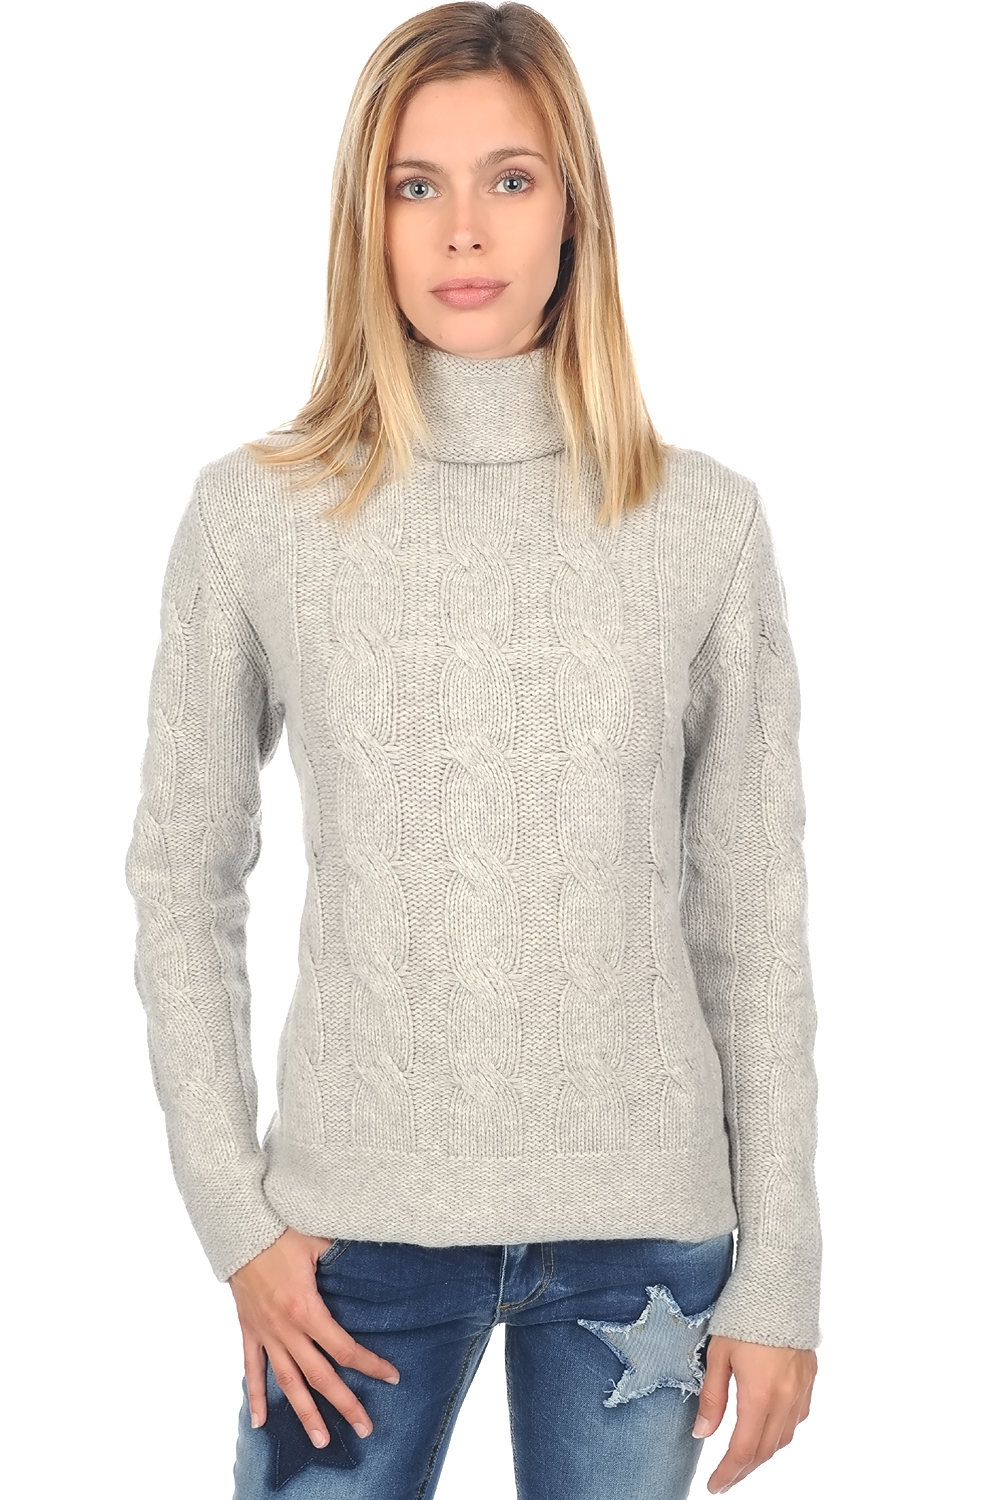 Cachemire pull femme col roule blanche flanelle chine 2xl